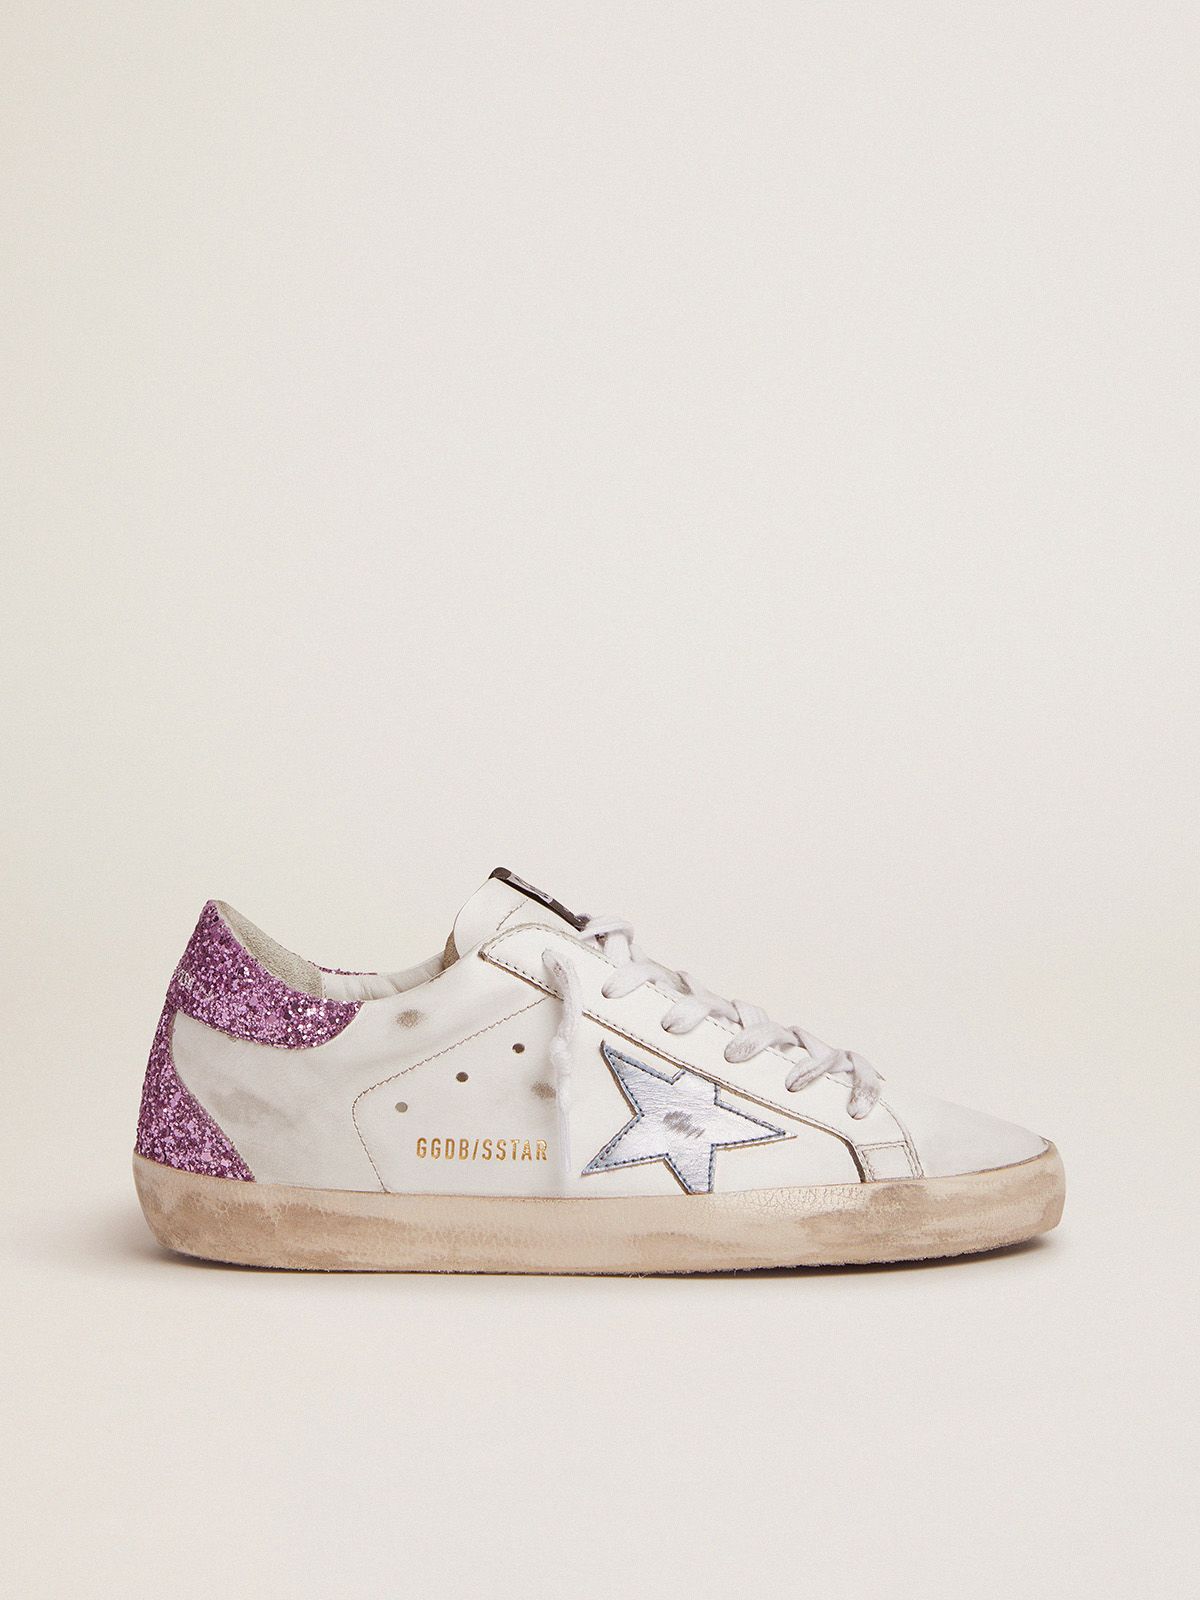 Super-Star sneakers with lavender glitter heel tab and light-blue metallic leather star